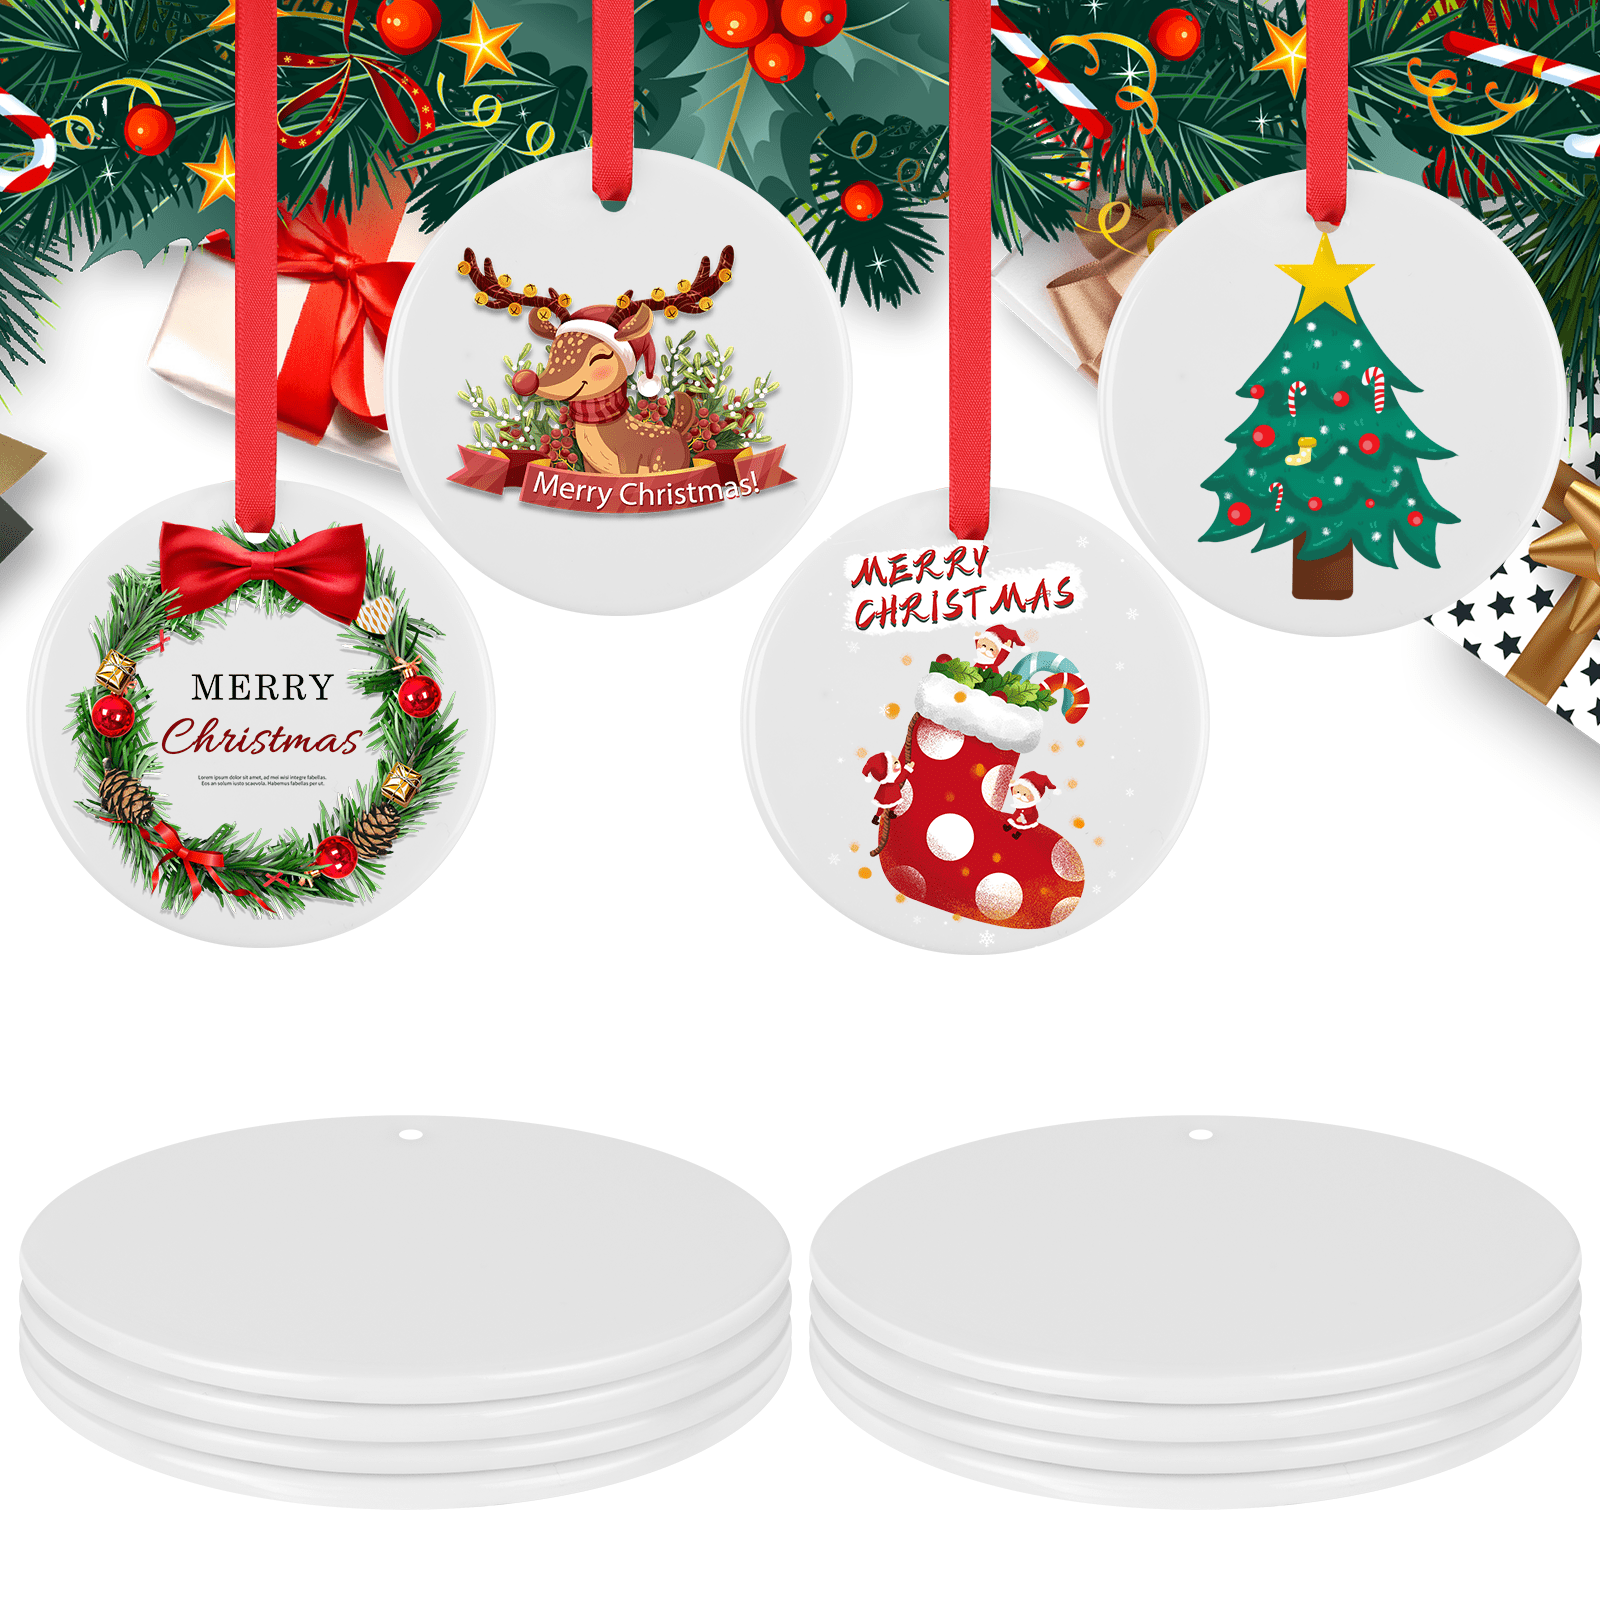  26 Pieces Ceramic Sublimation Ornaments Blanks, 2.87 Inches  Ceramic Ornaments for Sublimation Christmas Ornaments Blanks Discs Ceramic  Ornaments to Paint : Arts, Crafts & Sewing